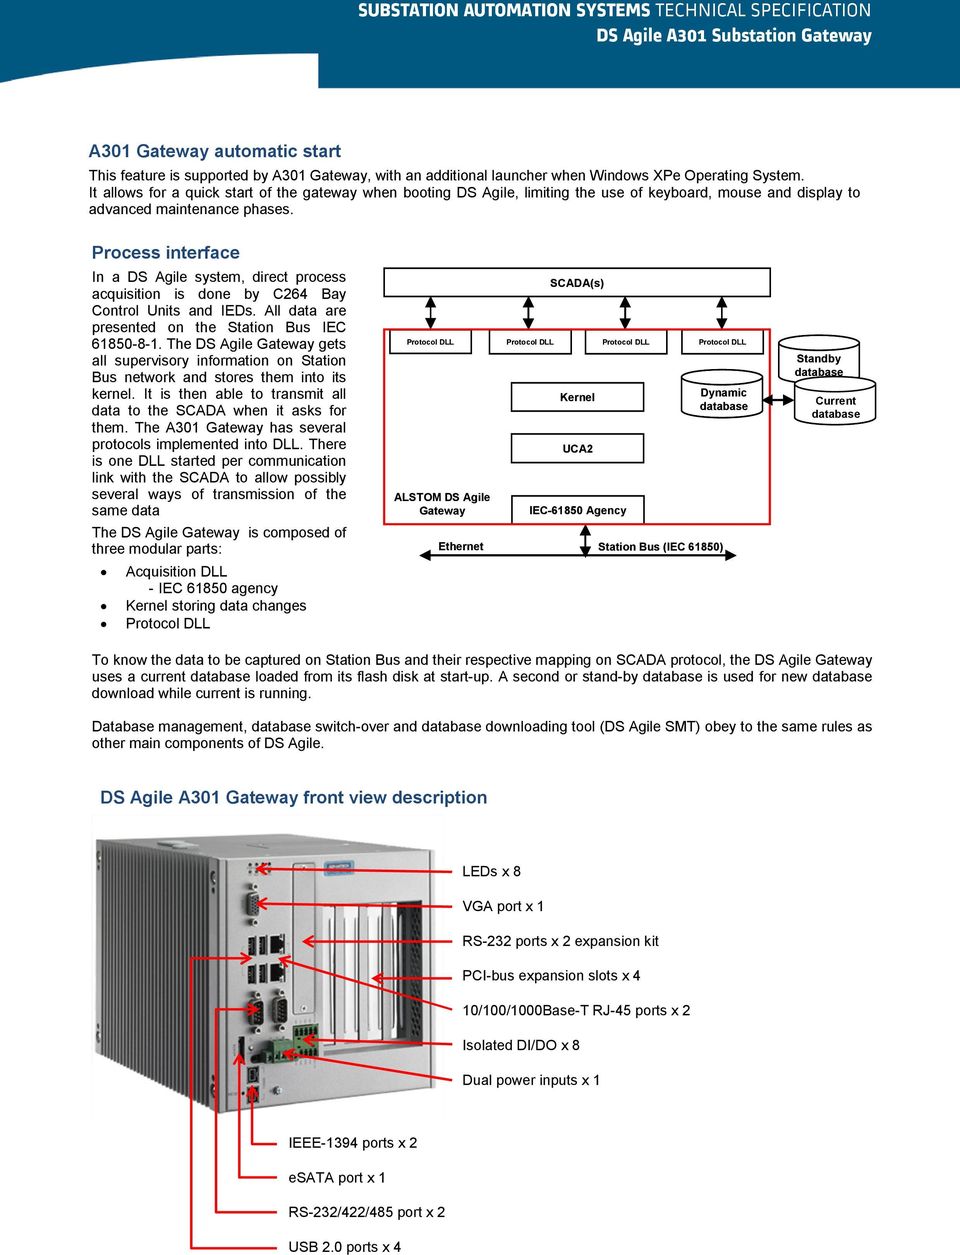 Process interface In a DS Agile system, direct process acquisition is done by C264 Bay Control Units and IEDs. All data are presented on the Station Bus IEC 61850-8-1.